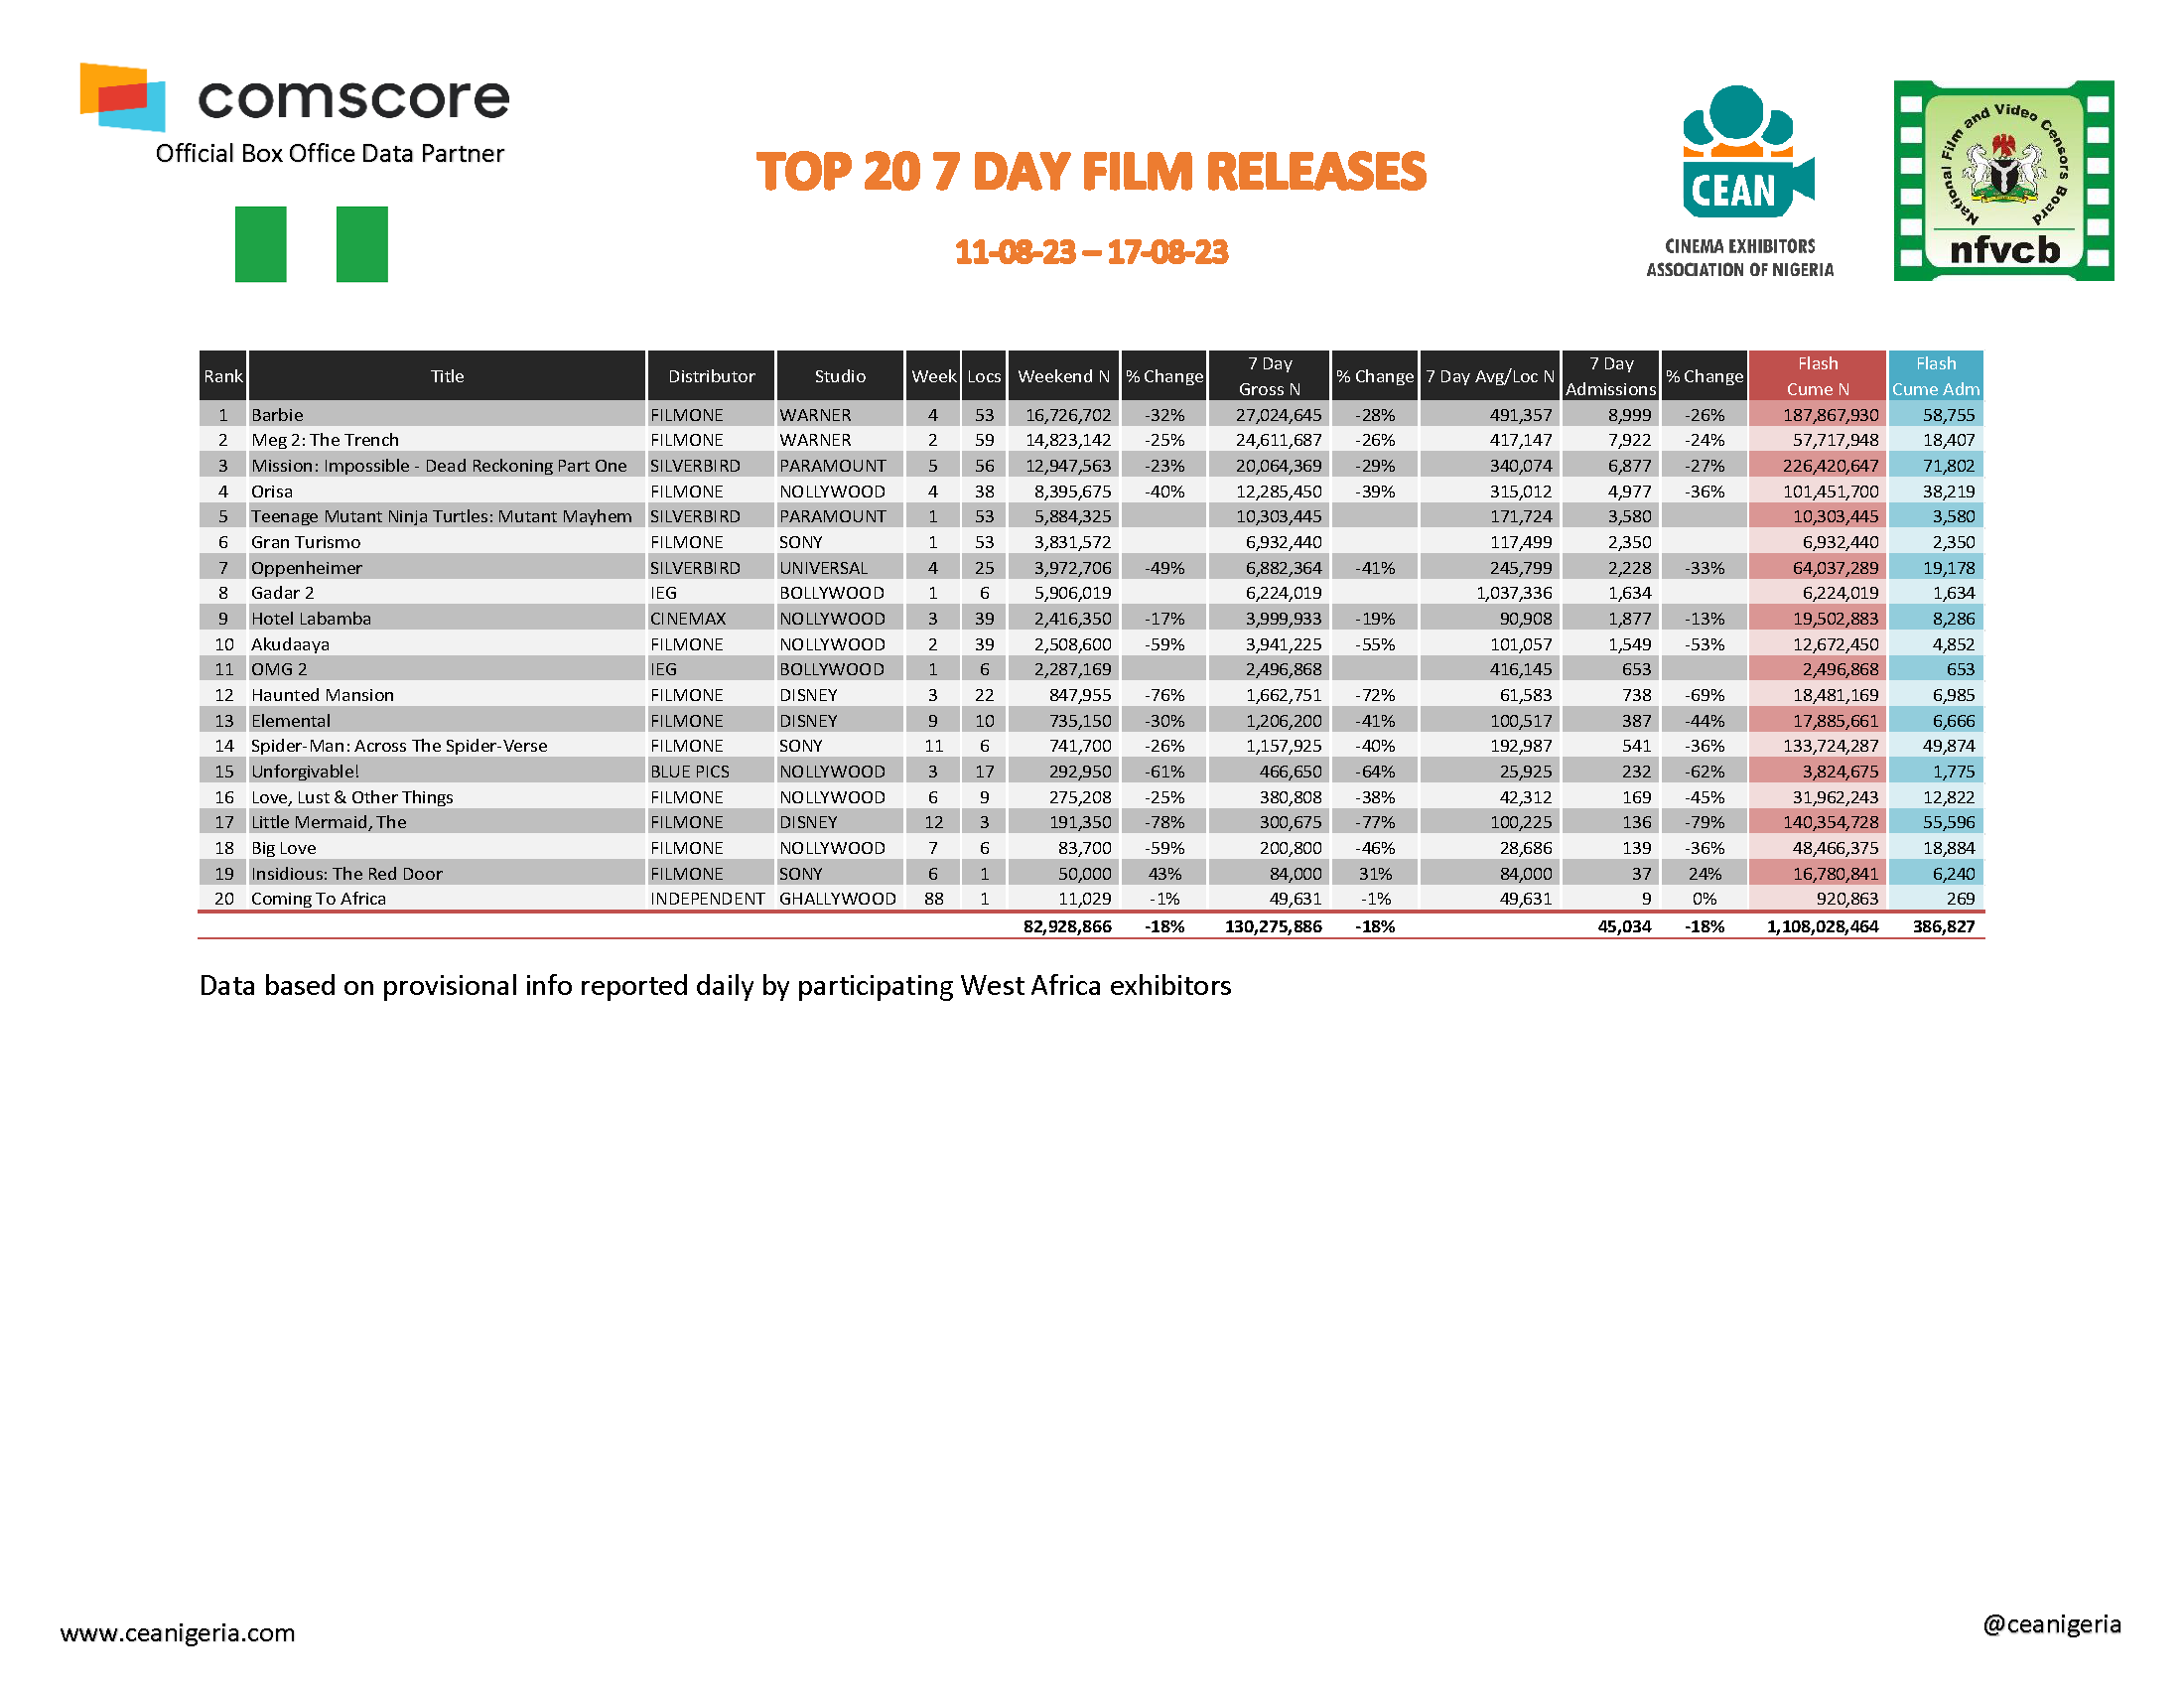 Top 20 films 7 Day 11th 17th August